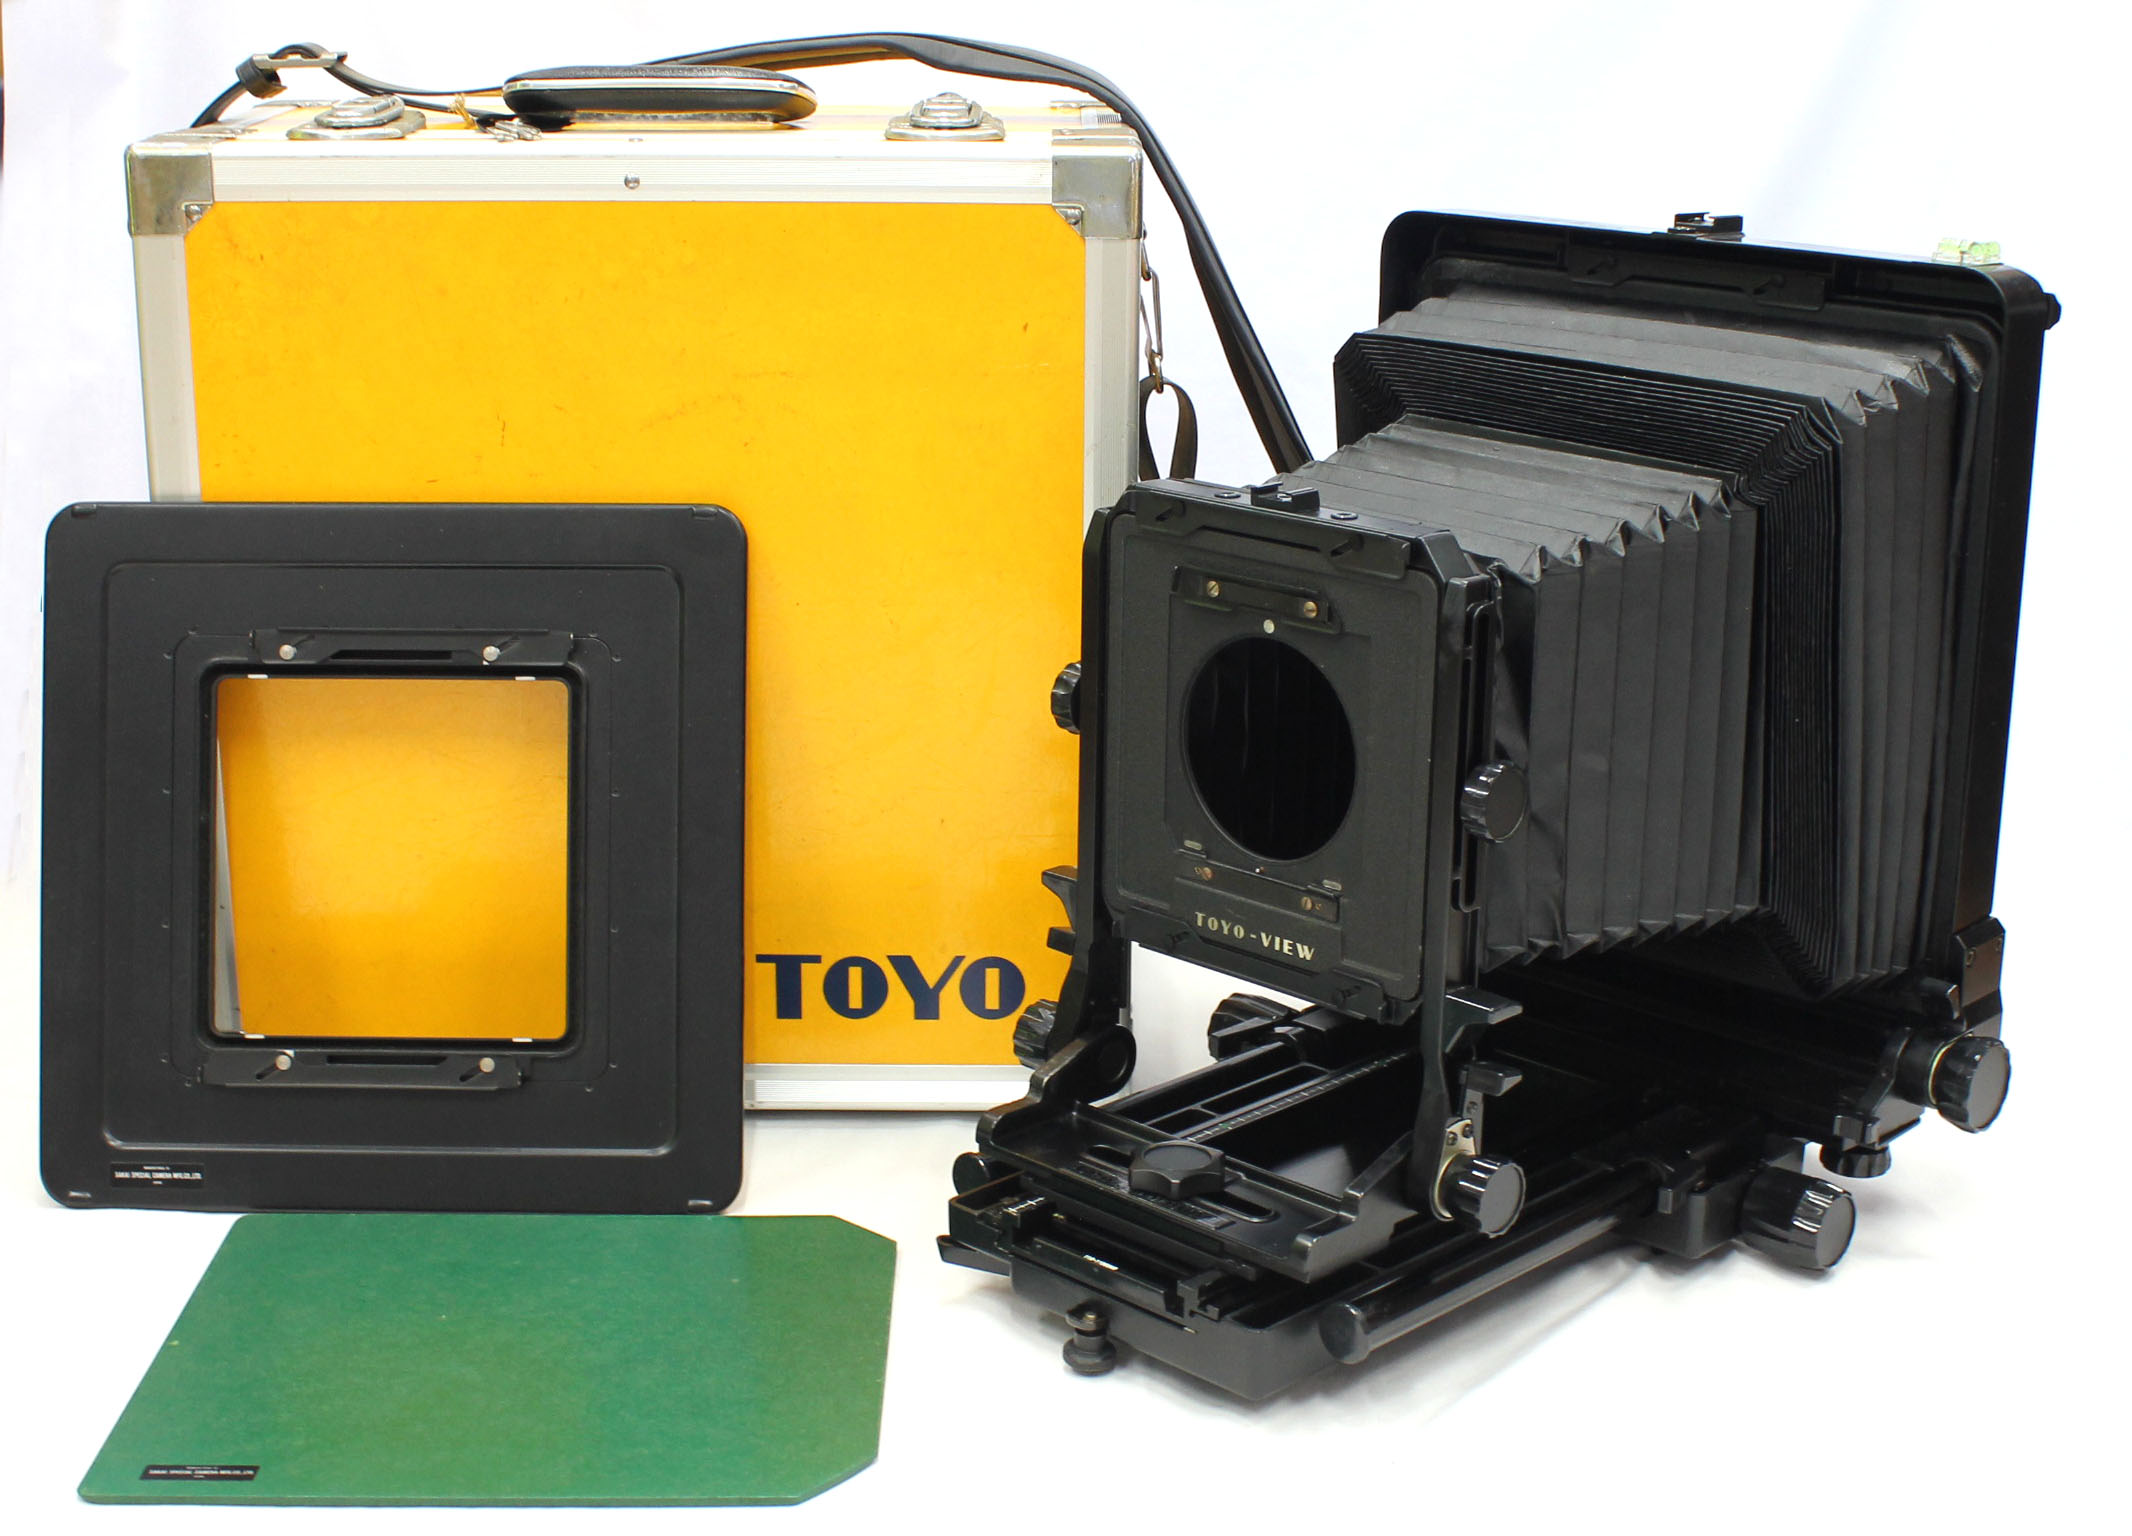 Toyo Field 810M II 8x10 Large Format Camera with Linhof Board Adapter in Toyo Case from Japan Photo 0